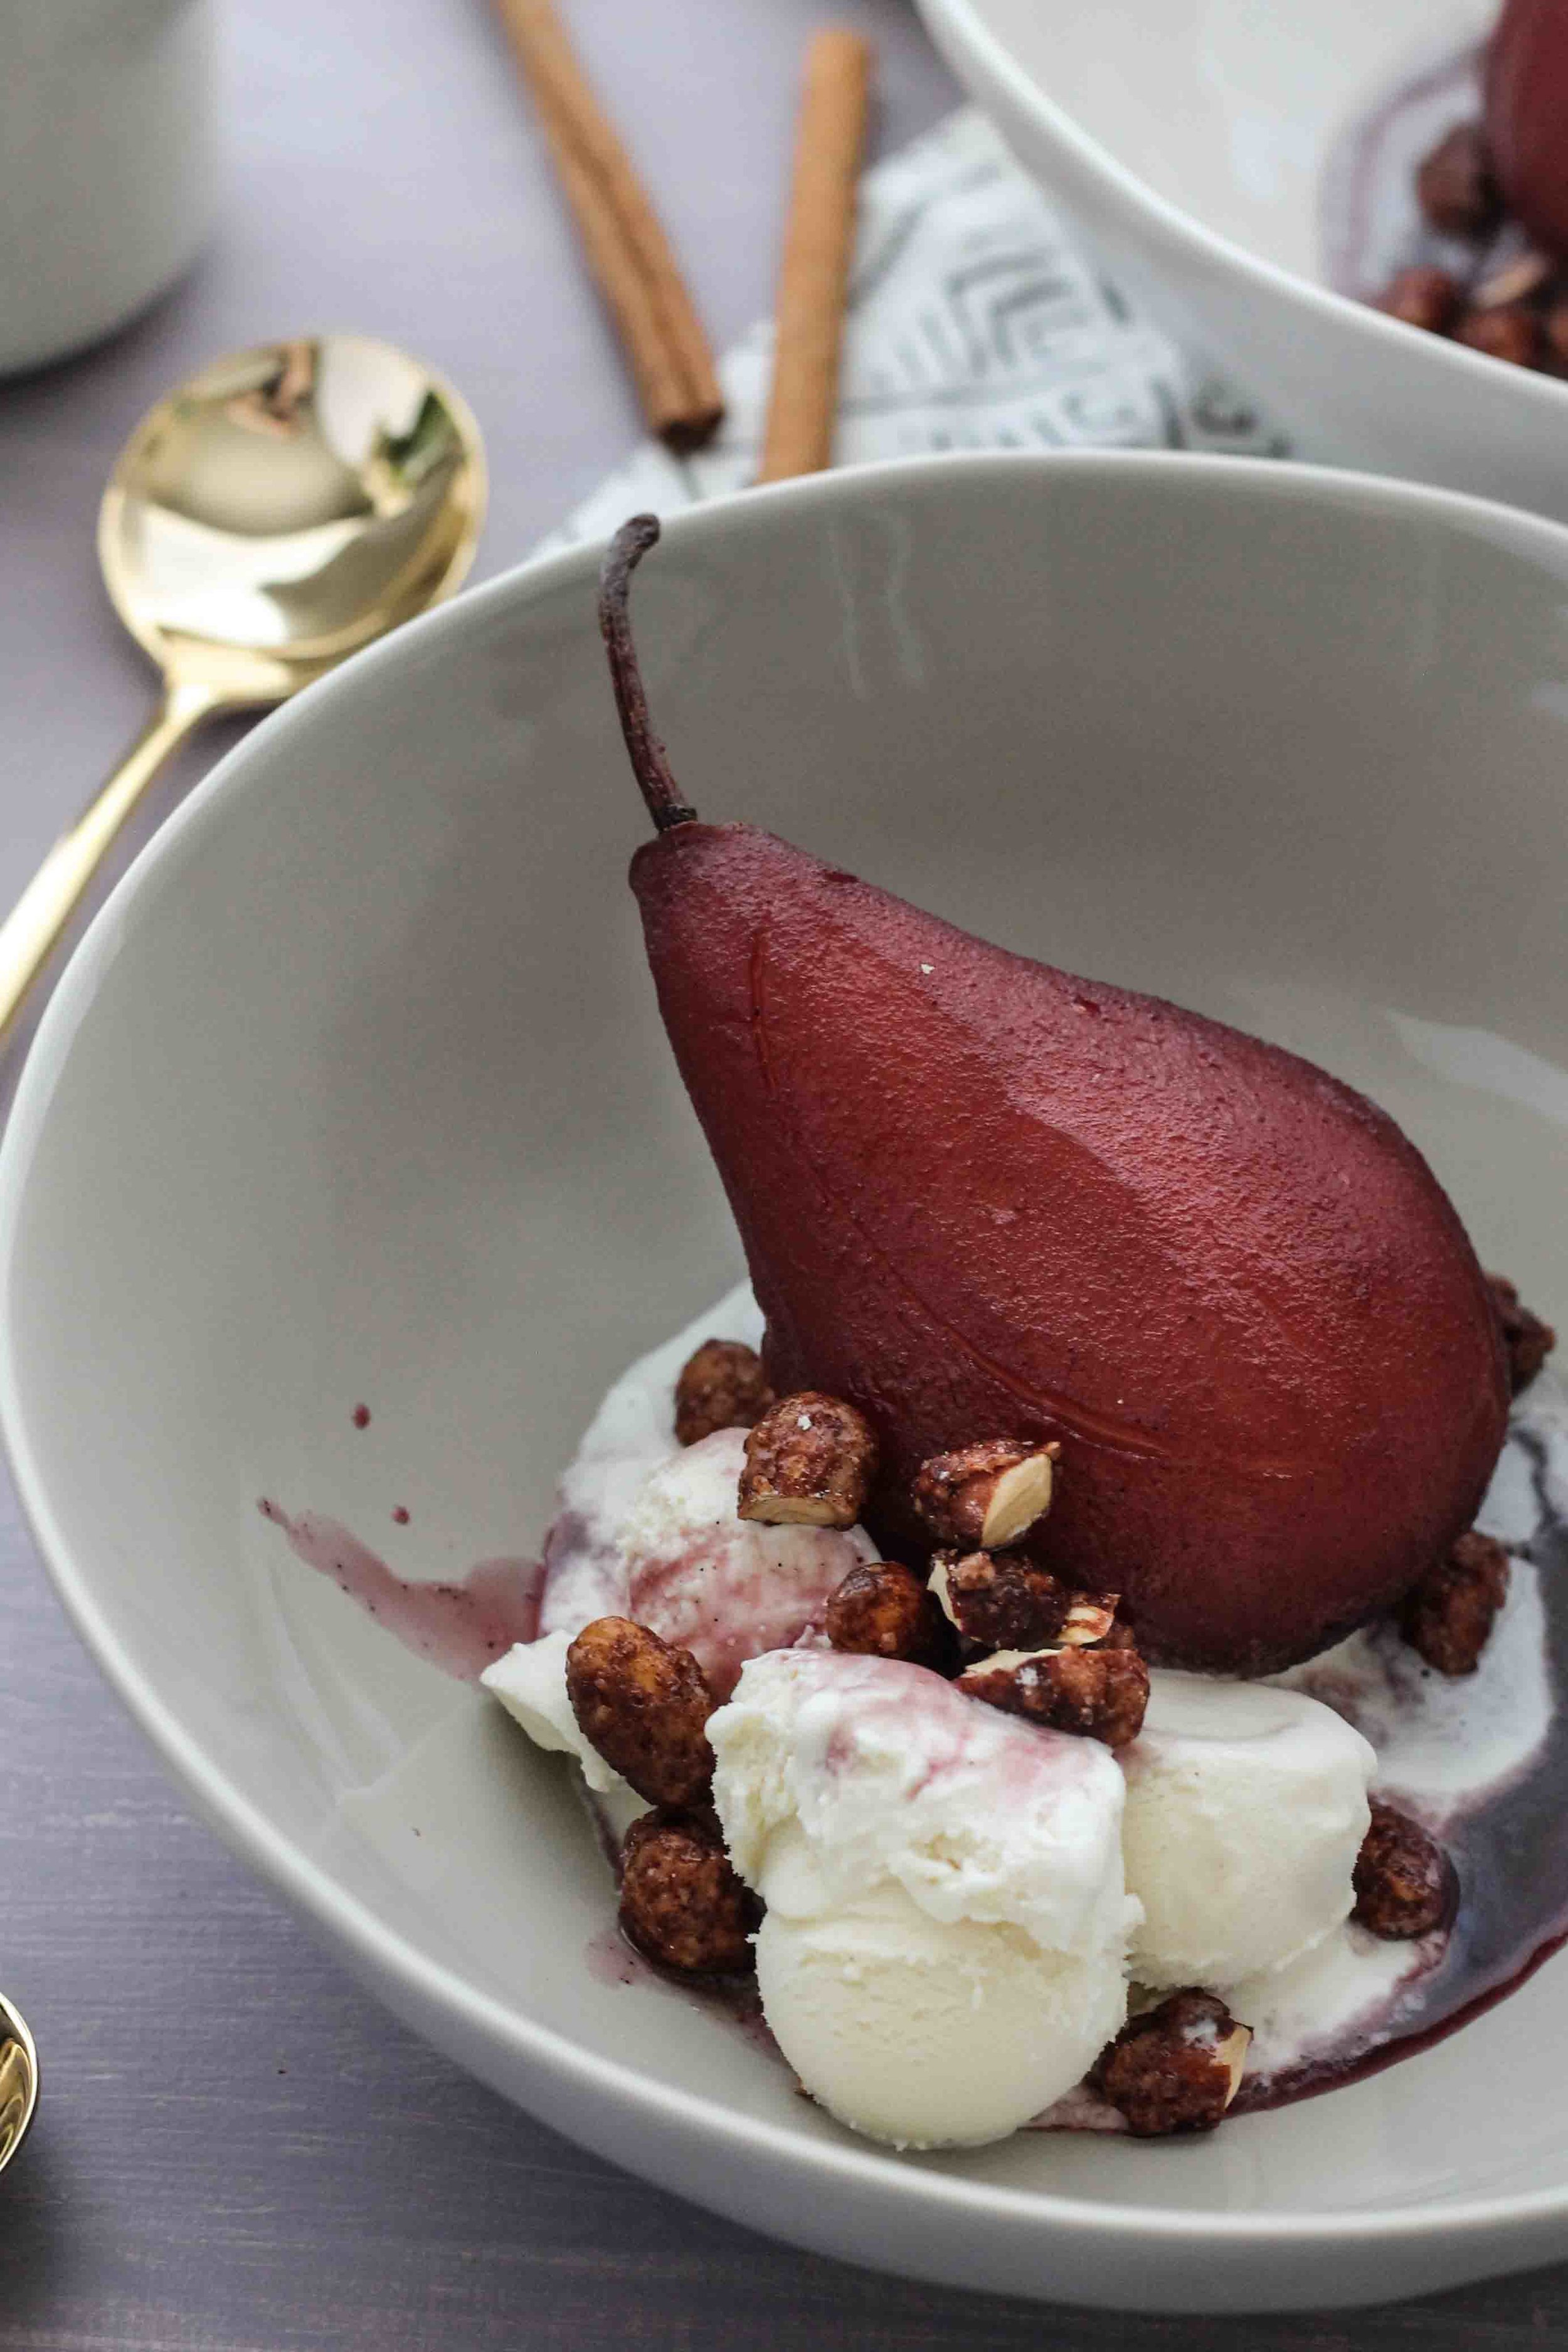 Slow Cooker Vanilla-Spiced Wine Poached Pears with Cost Plus World Market [ www.pedanticfoodie.com ] #sponsored